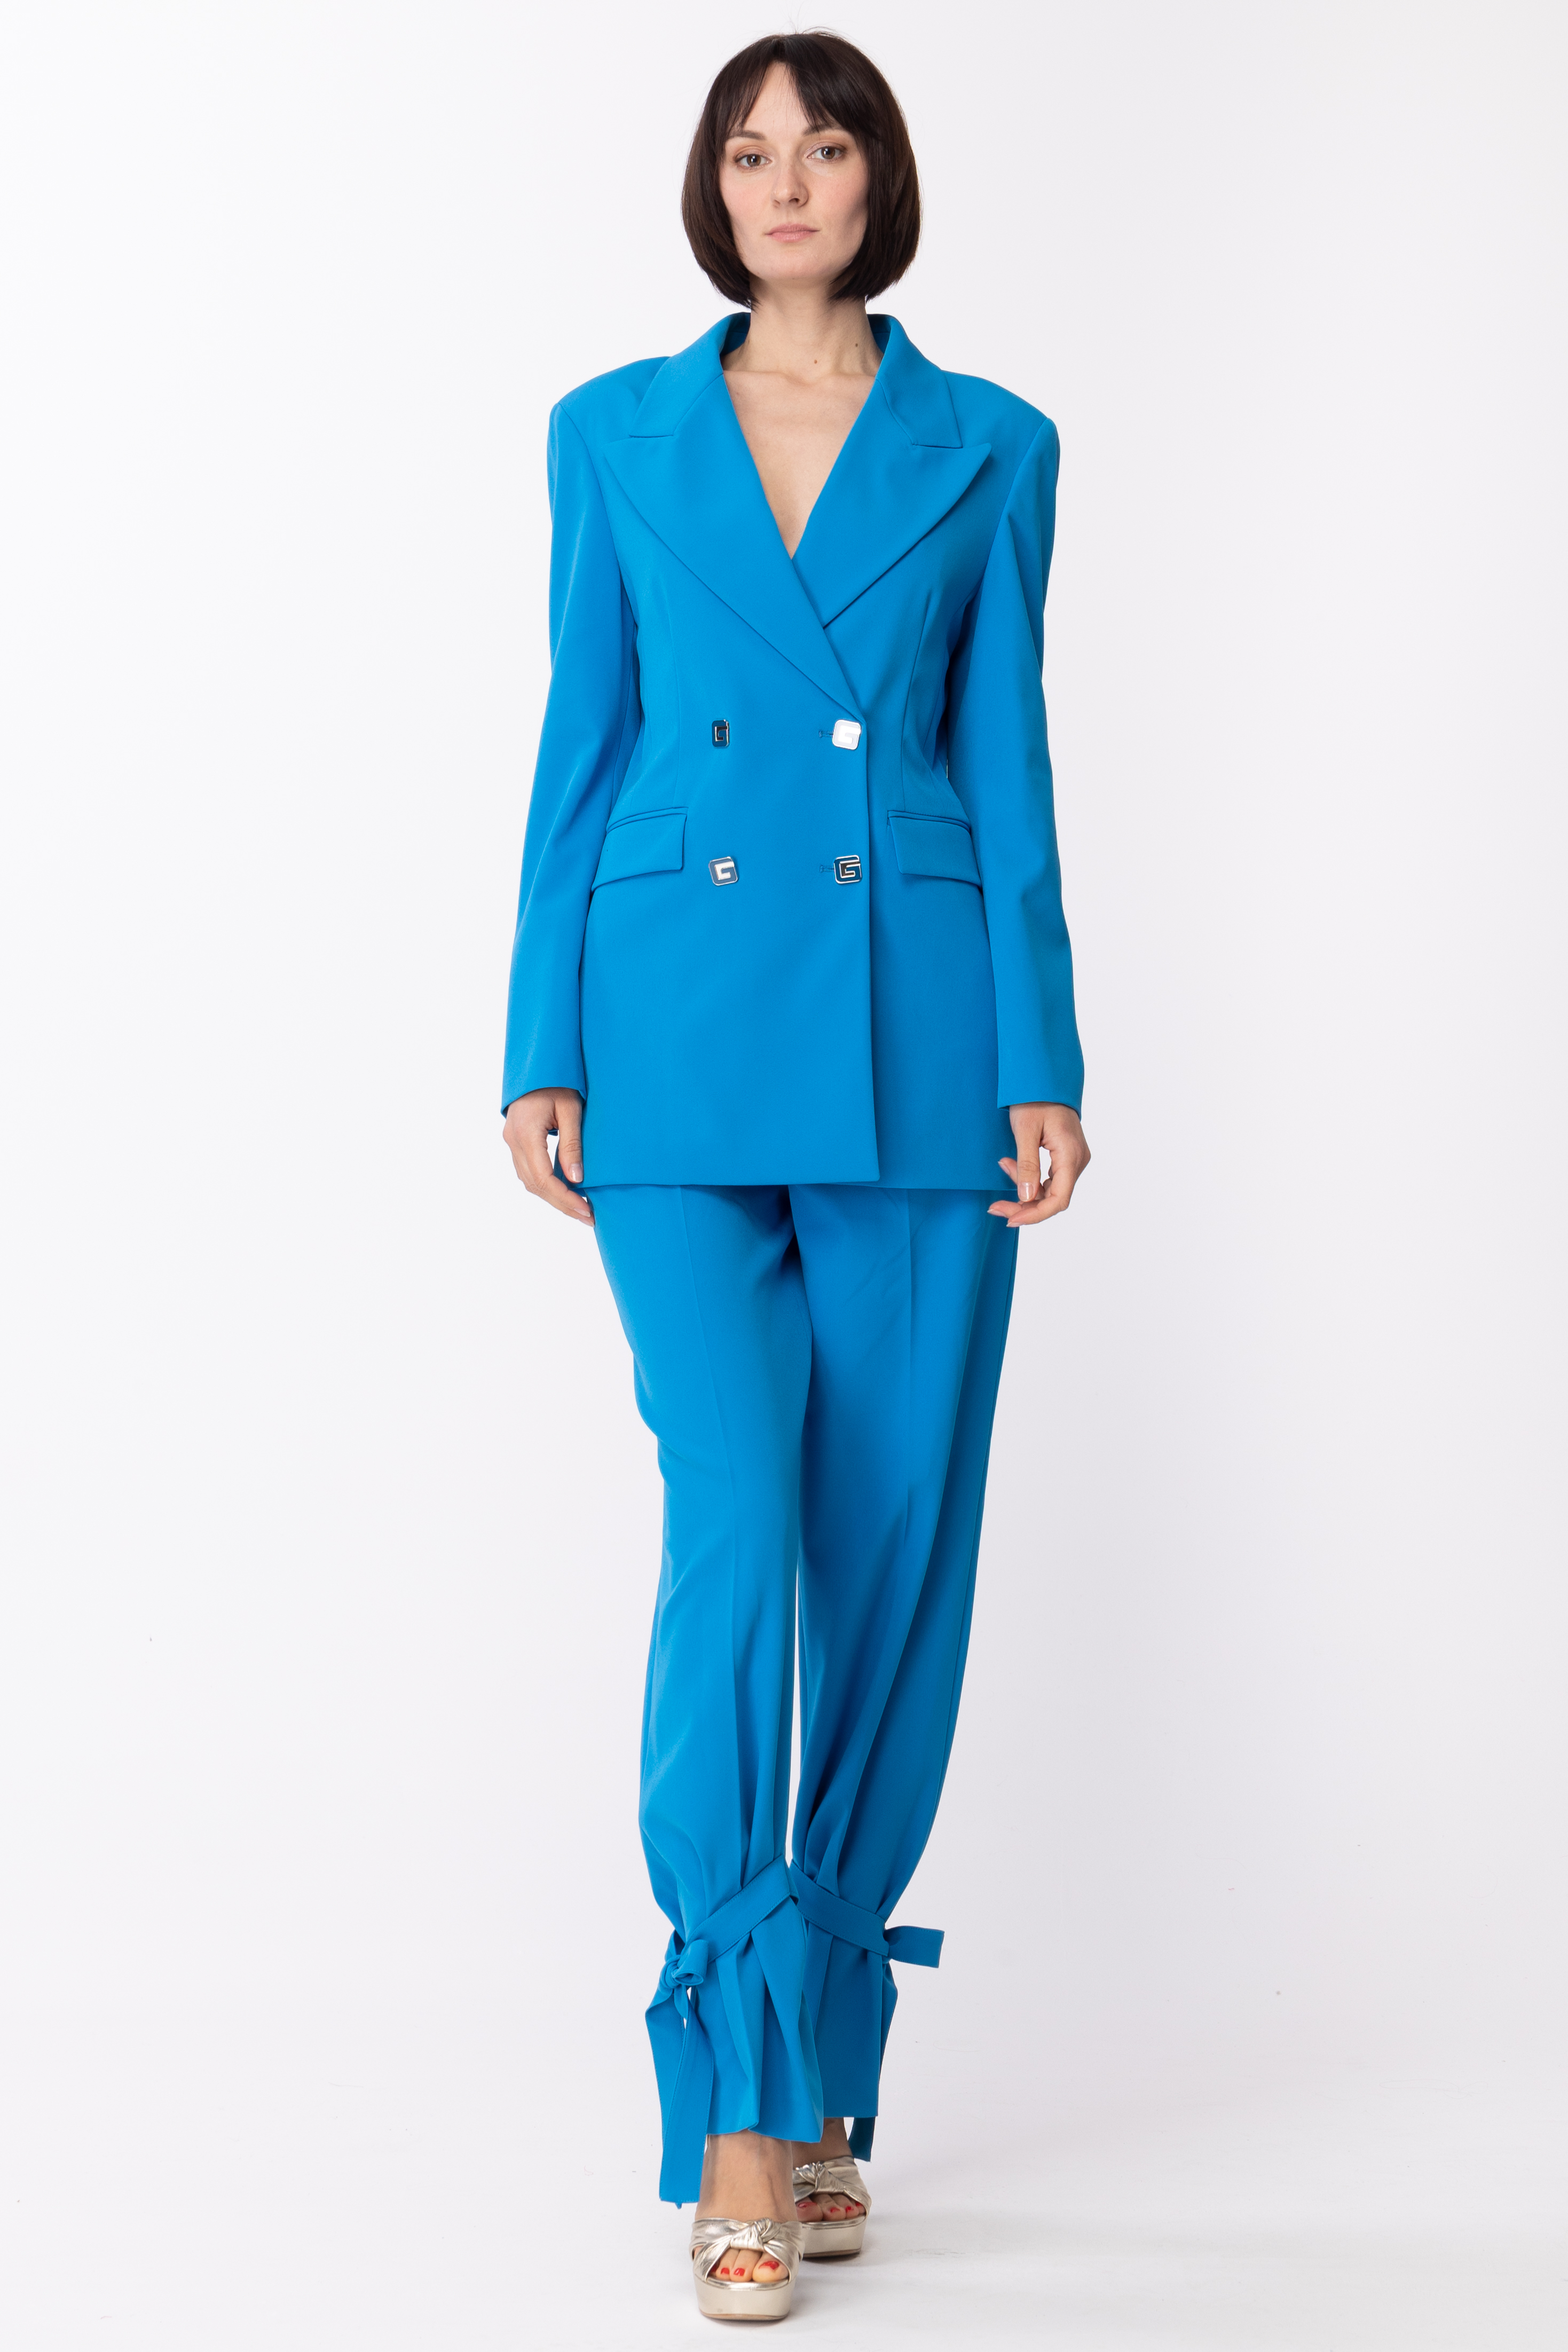 Preview: Gaelle Paris Trousers with ribbon at the bottom Blu Cobalto